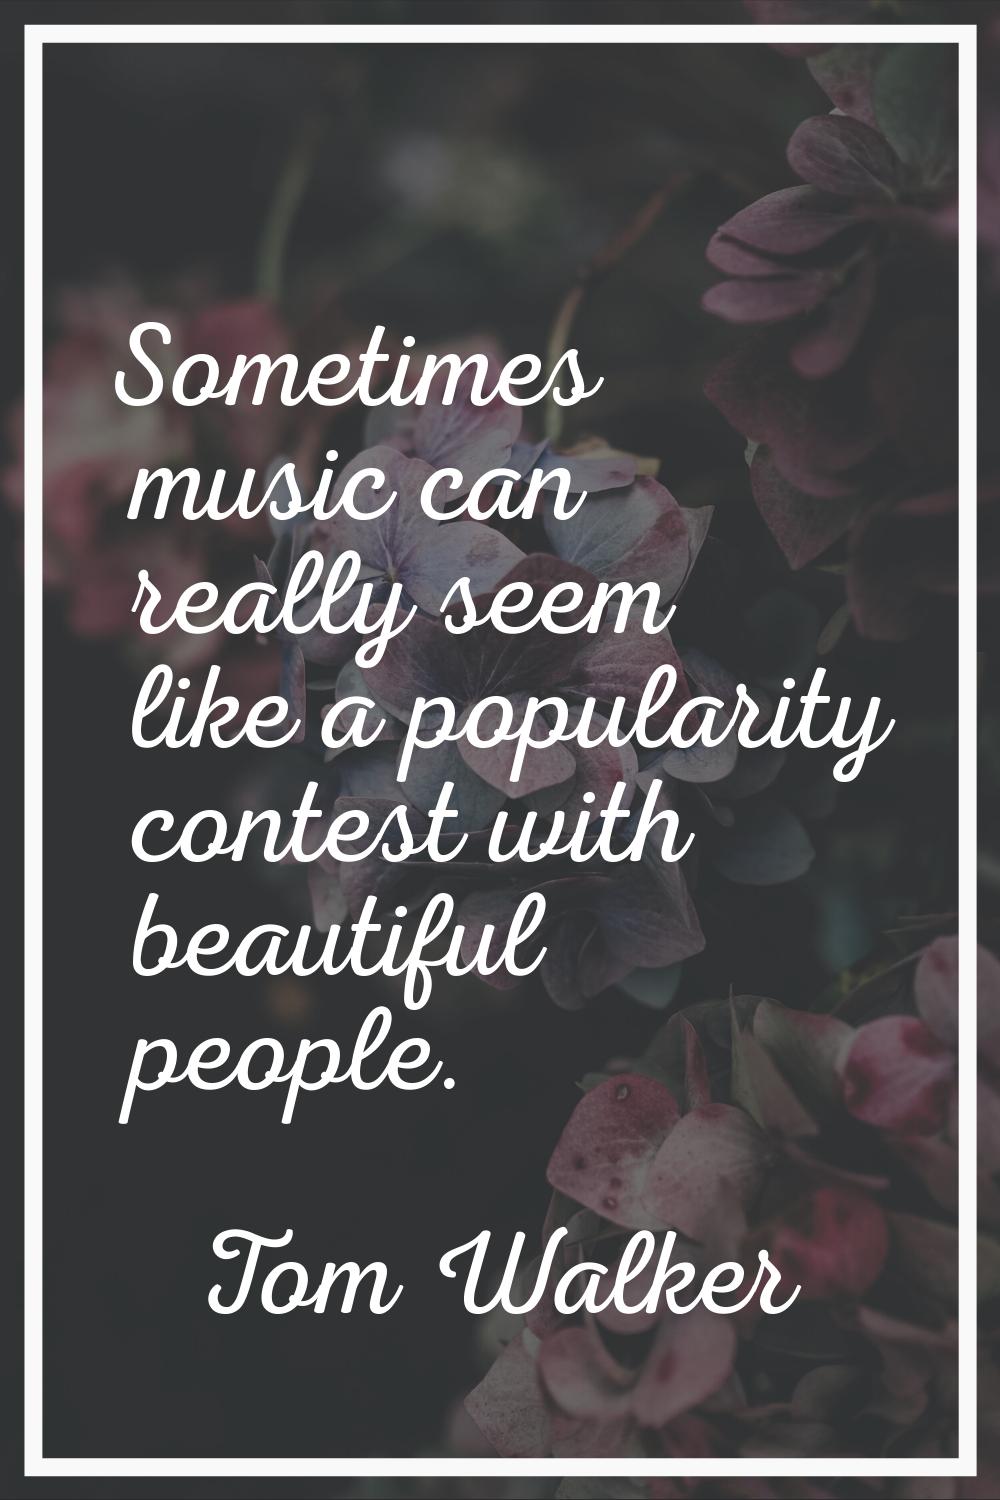 Sometimes music can really seem like a popularity contest with beautiful people.